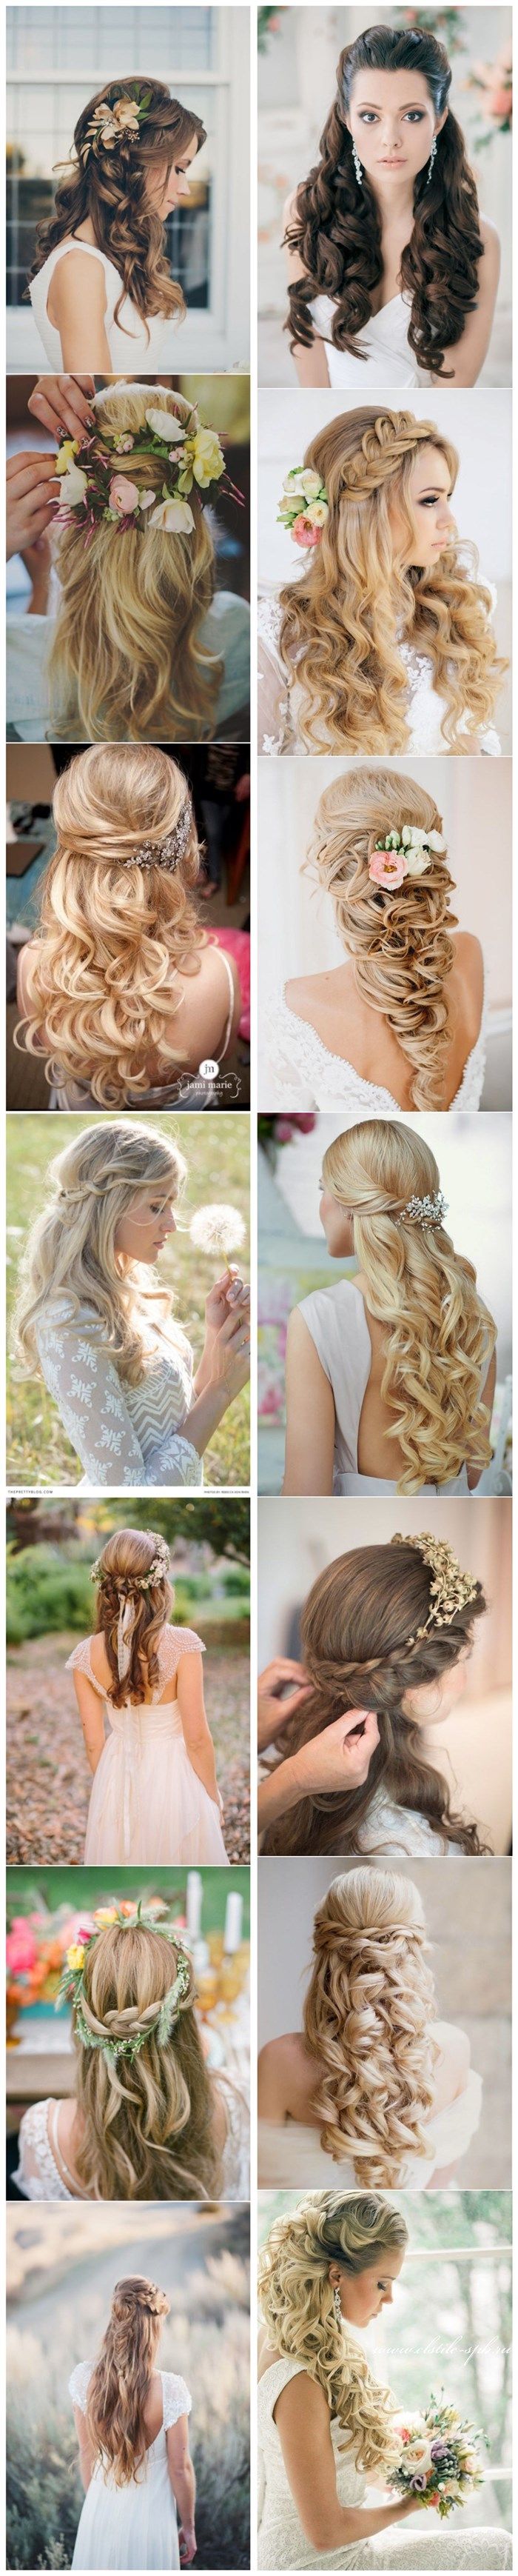 Wedding Hairstyle For Long Hair Wedding Hairstyles